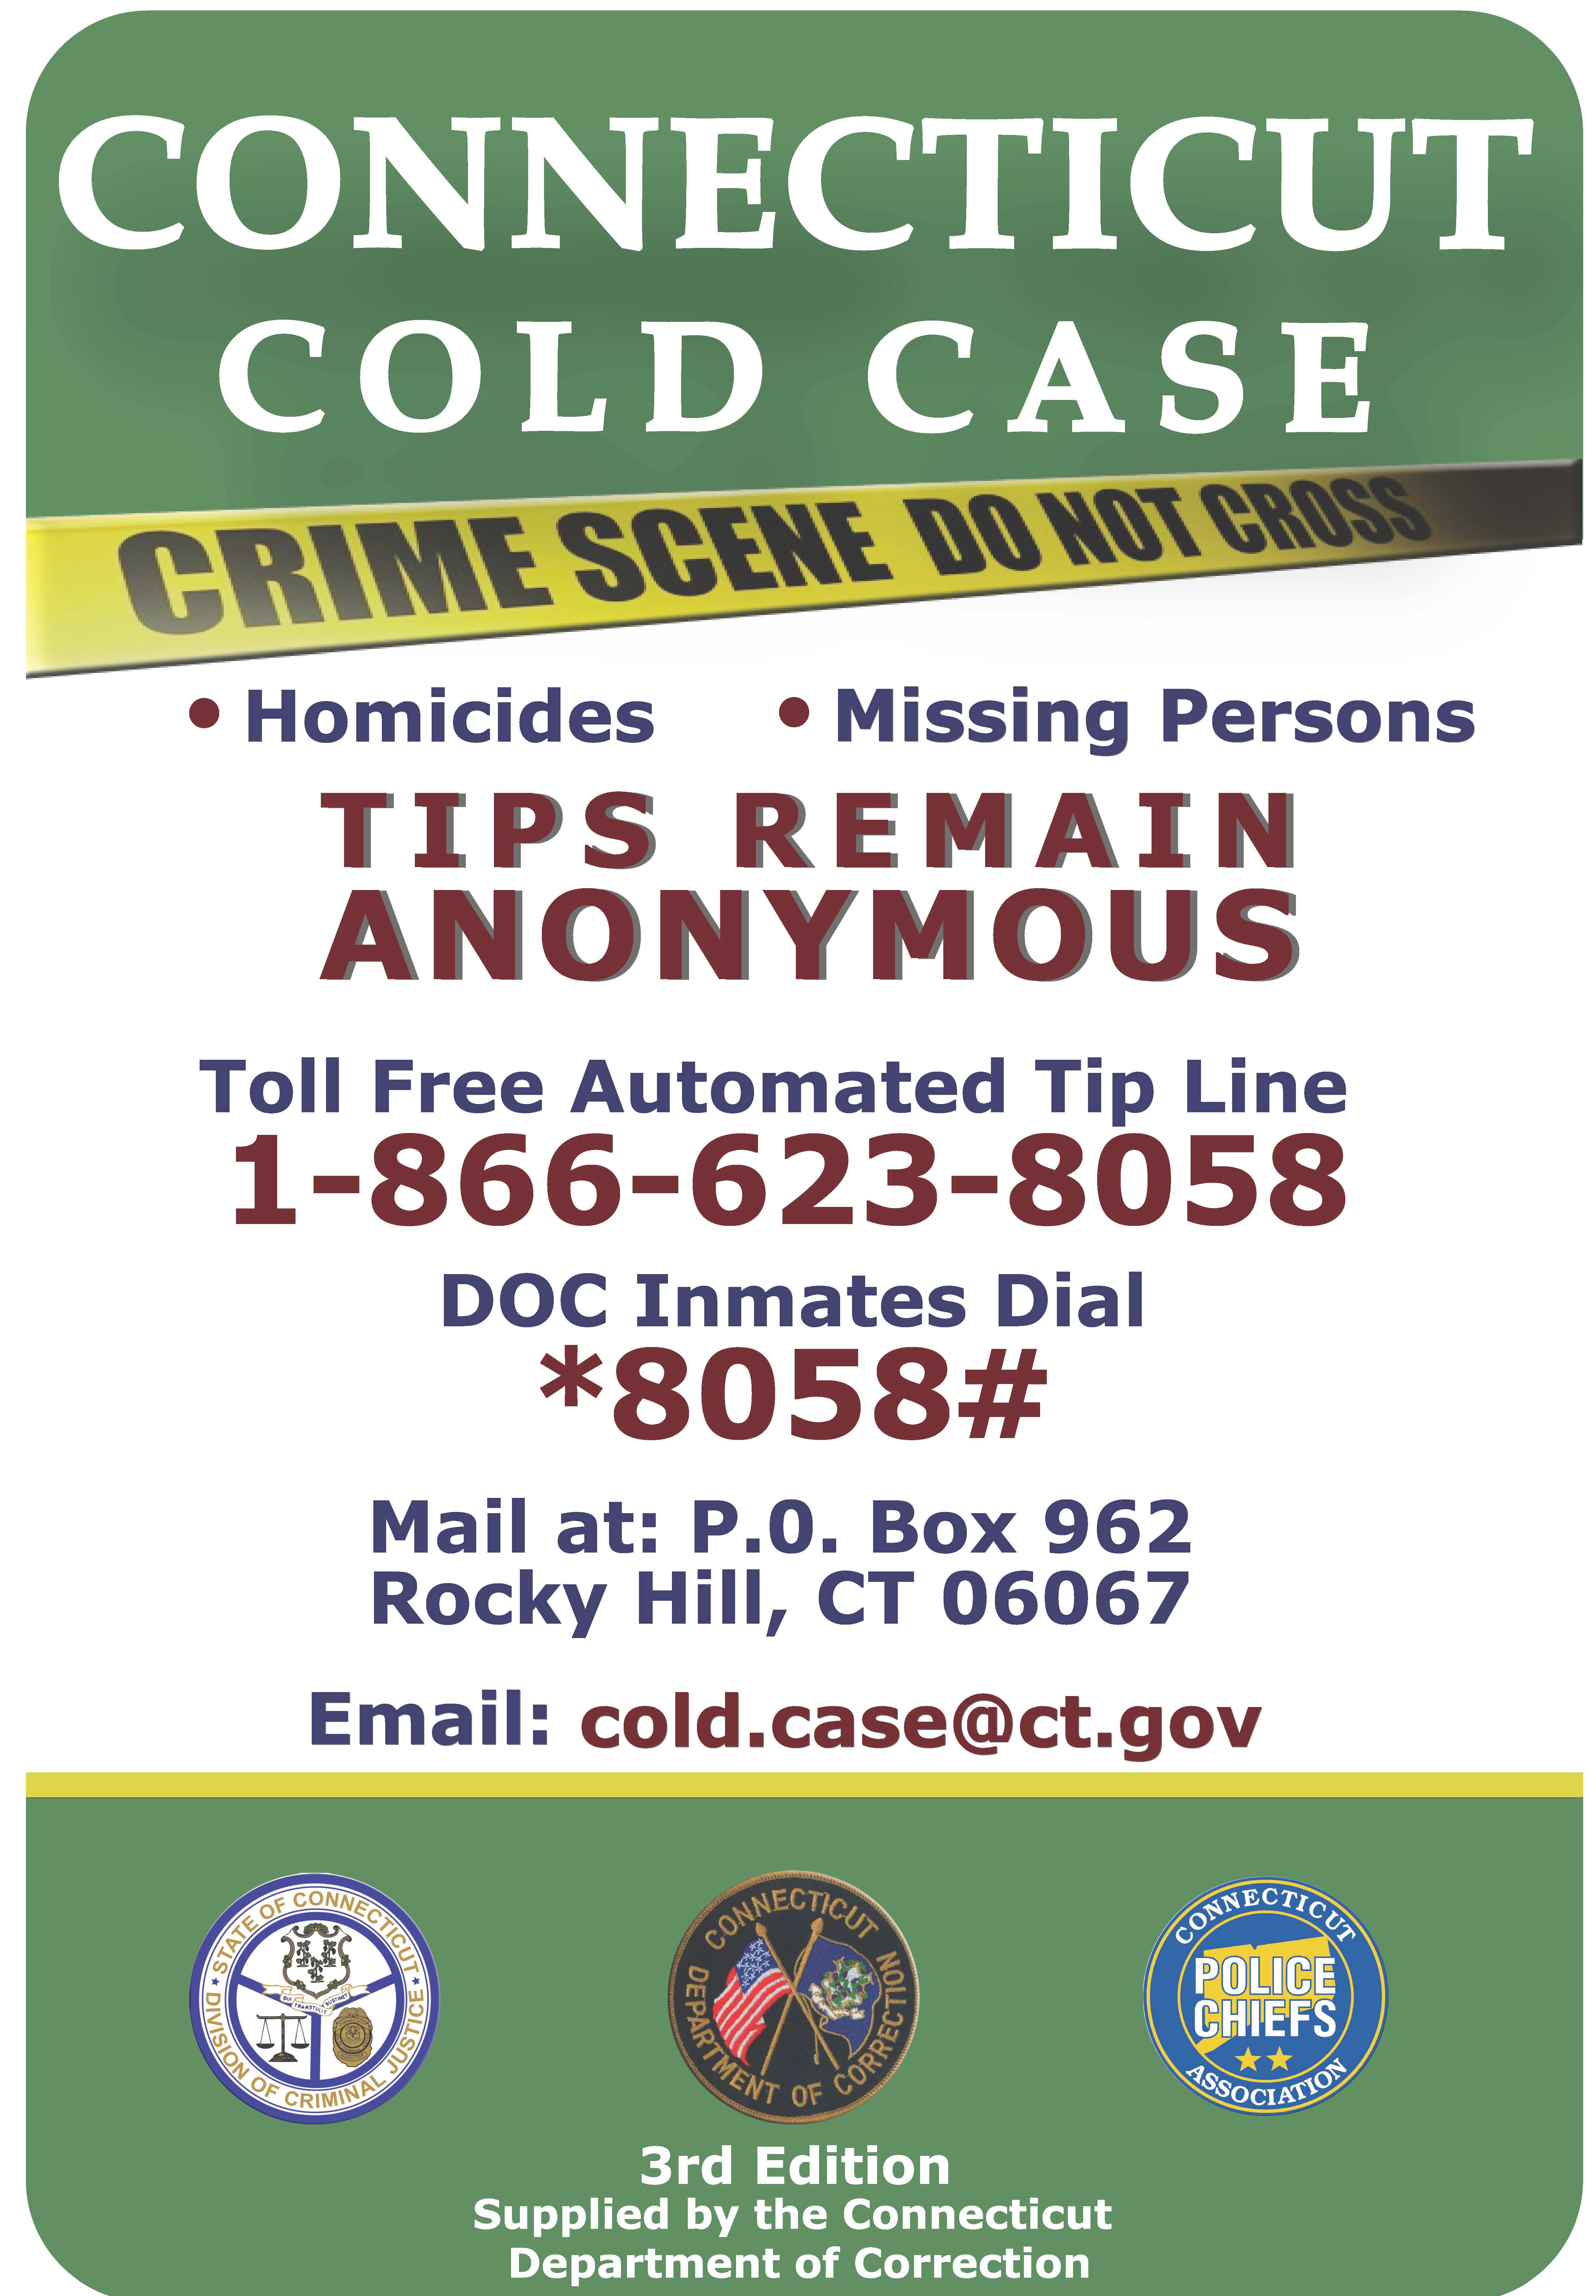 Follow this link to see the third edition of Cold Case Playing Cards.